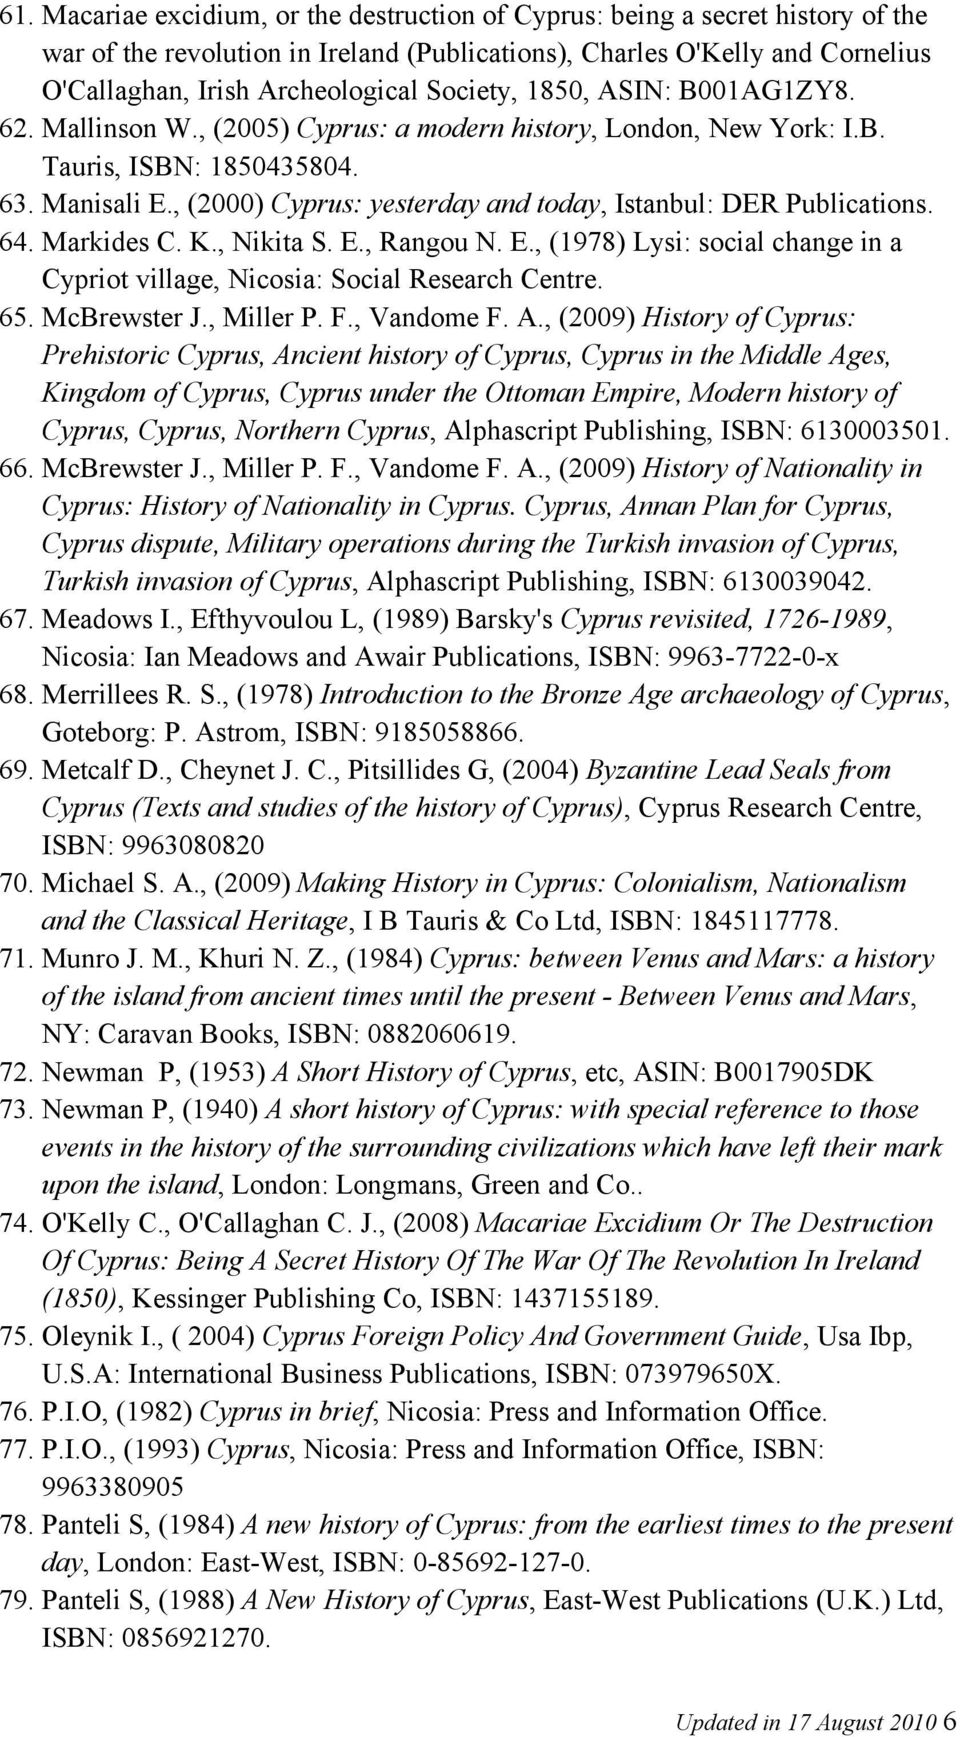 , (2000) Cyprus: yesterday and today, Istanbul: DER Publications. 64. Markides C. K., Nikita S. E., Rangou N. E., (1978) Lysi: social change in a Cypriot village, Nicosia: Social Research Centre. 65.